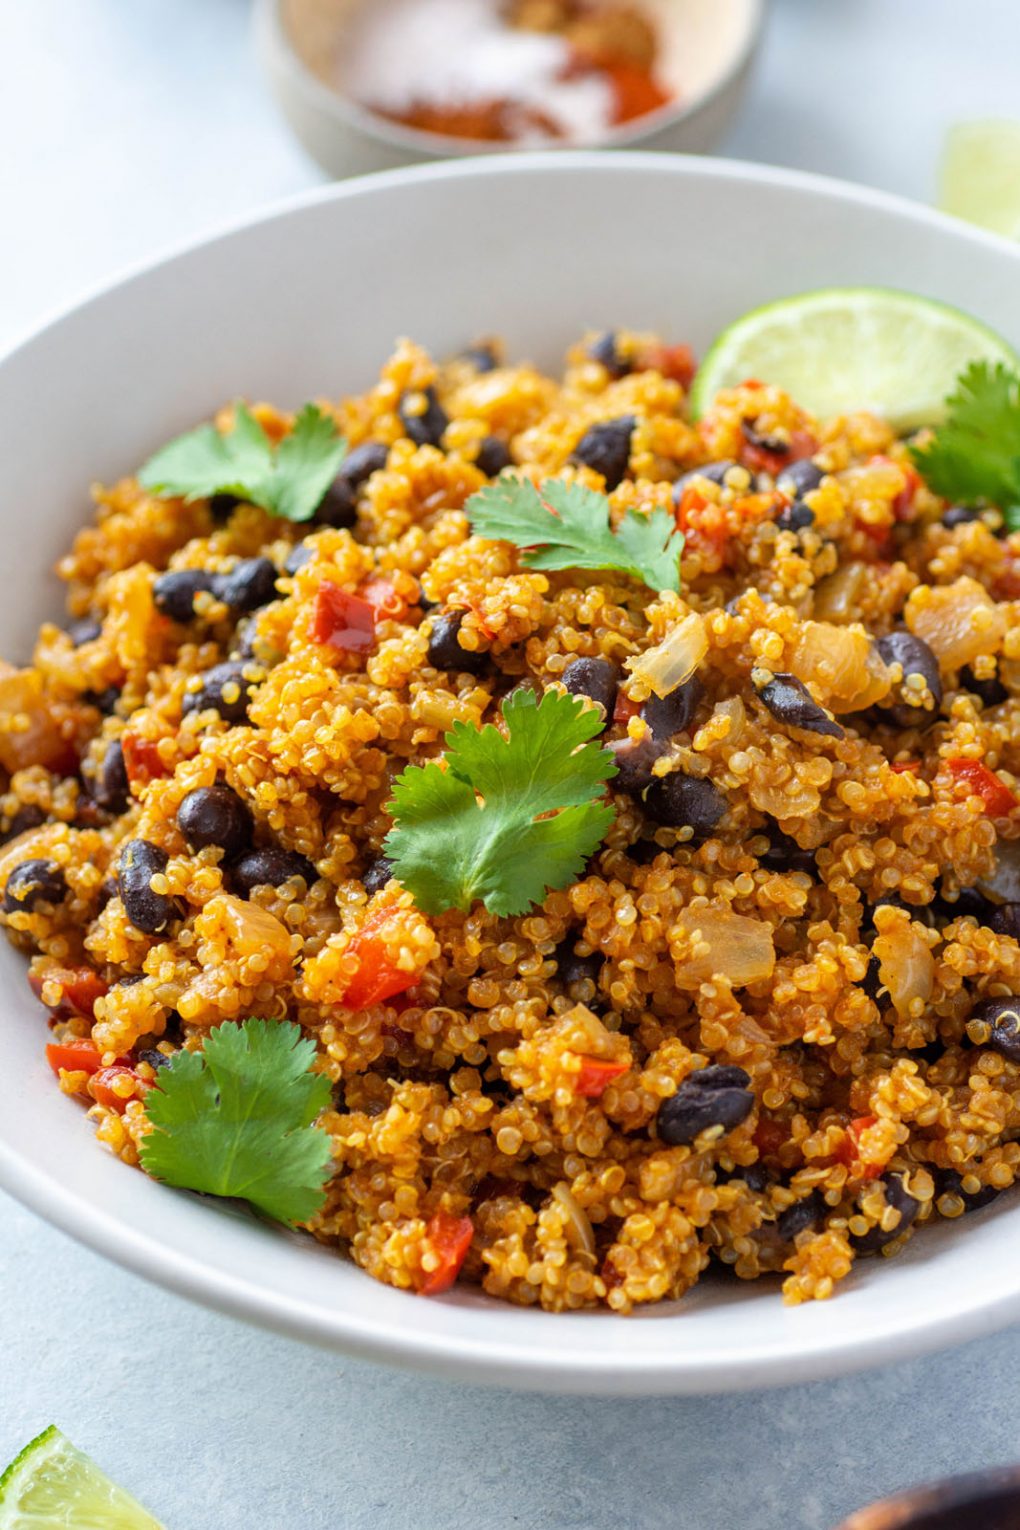 Close up side angle shot of southwest quinoa with black beans, diced red pepper, fresh cilantro, and garnished with lime wedges. In a white bowl on a light colored background. 